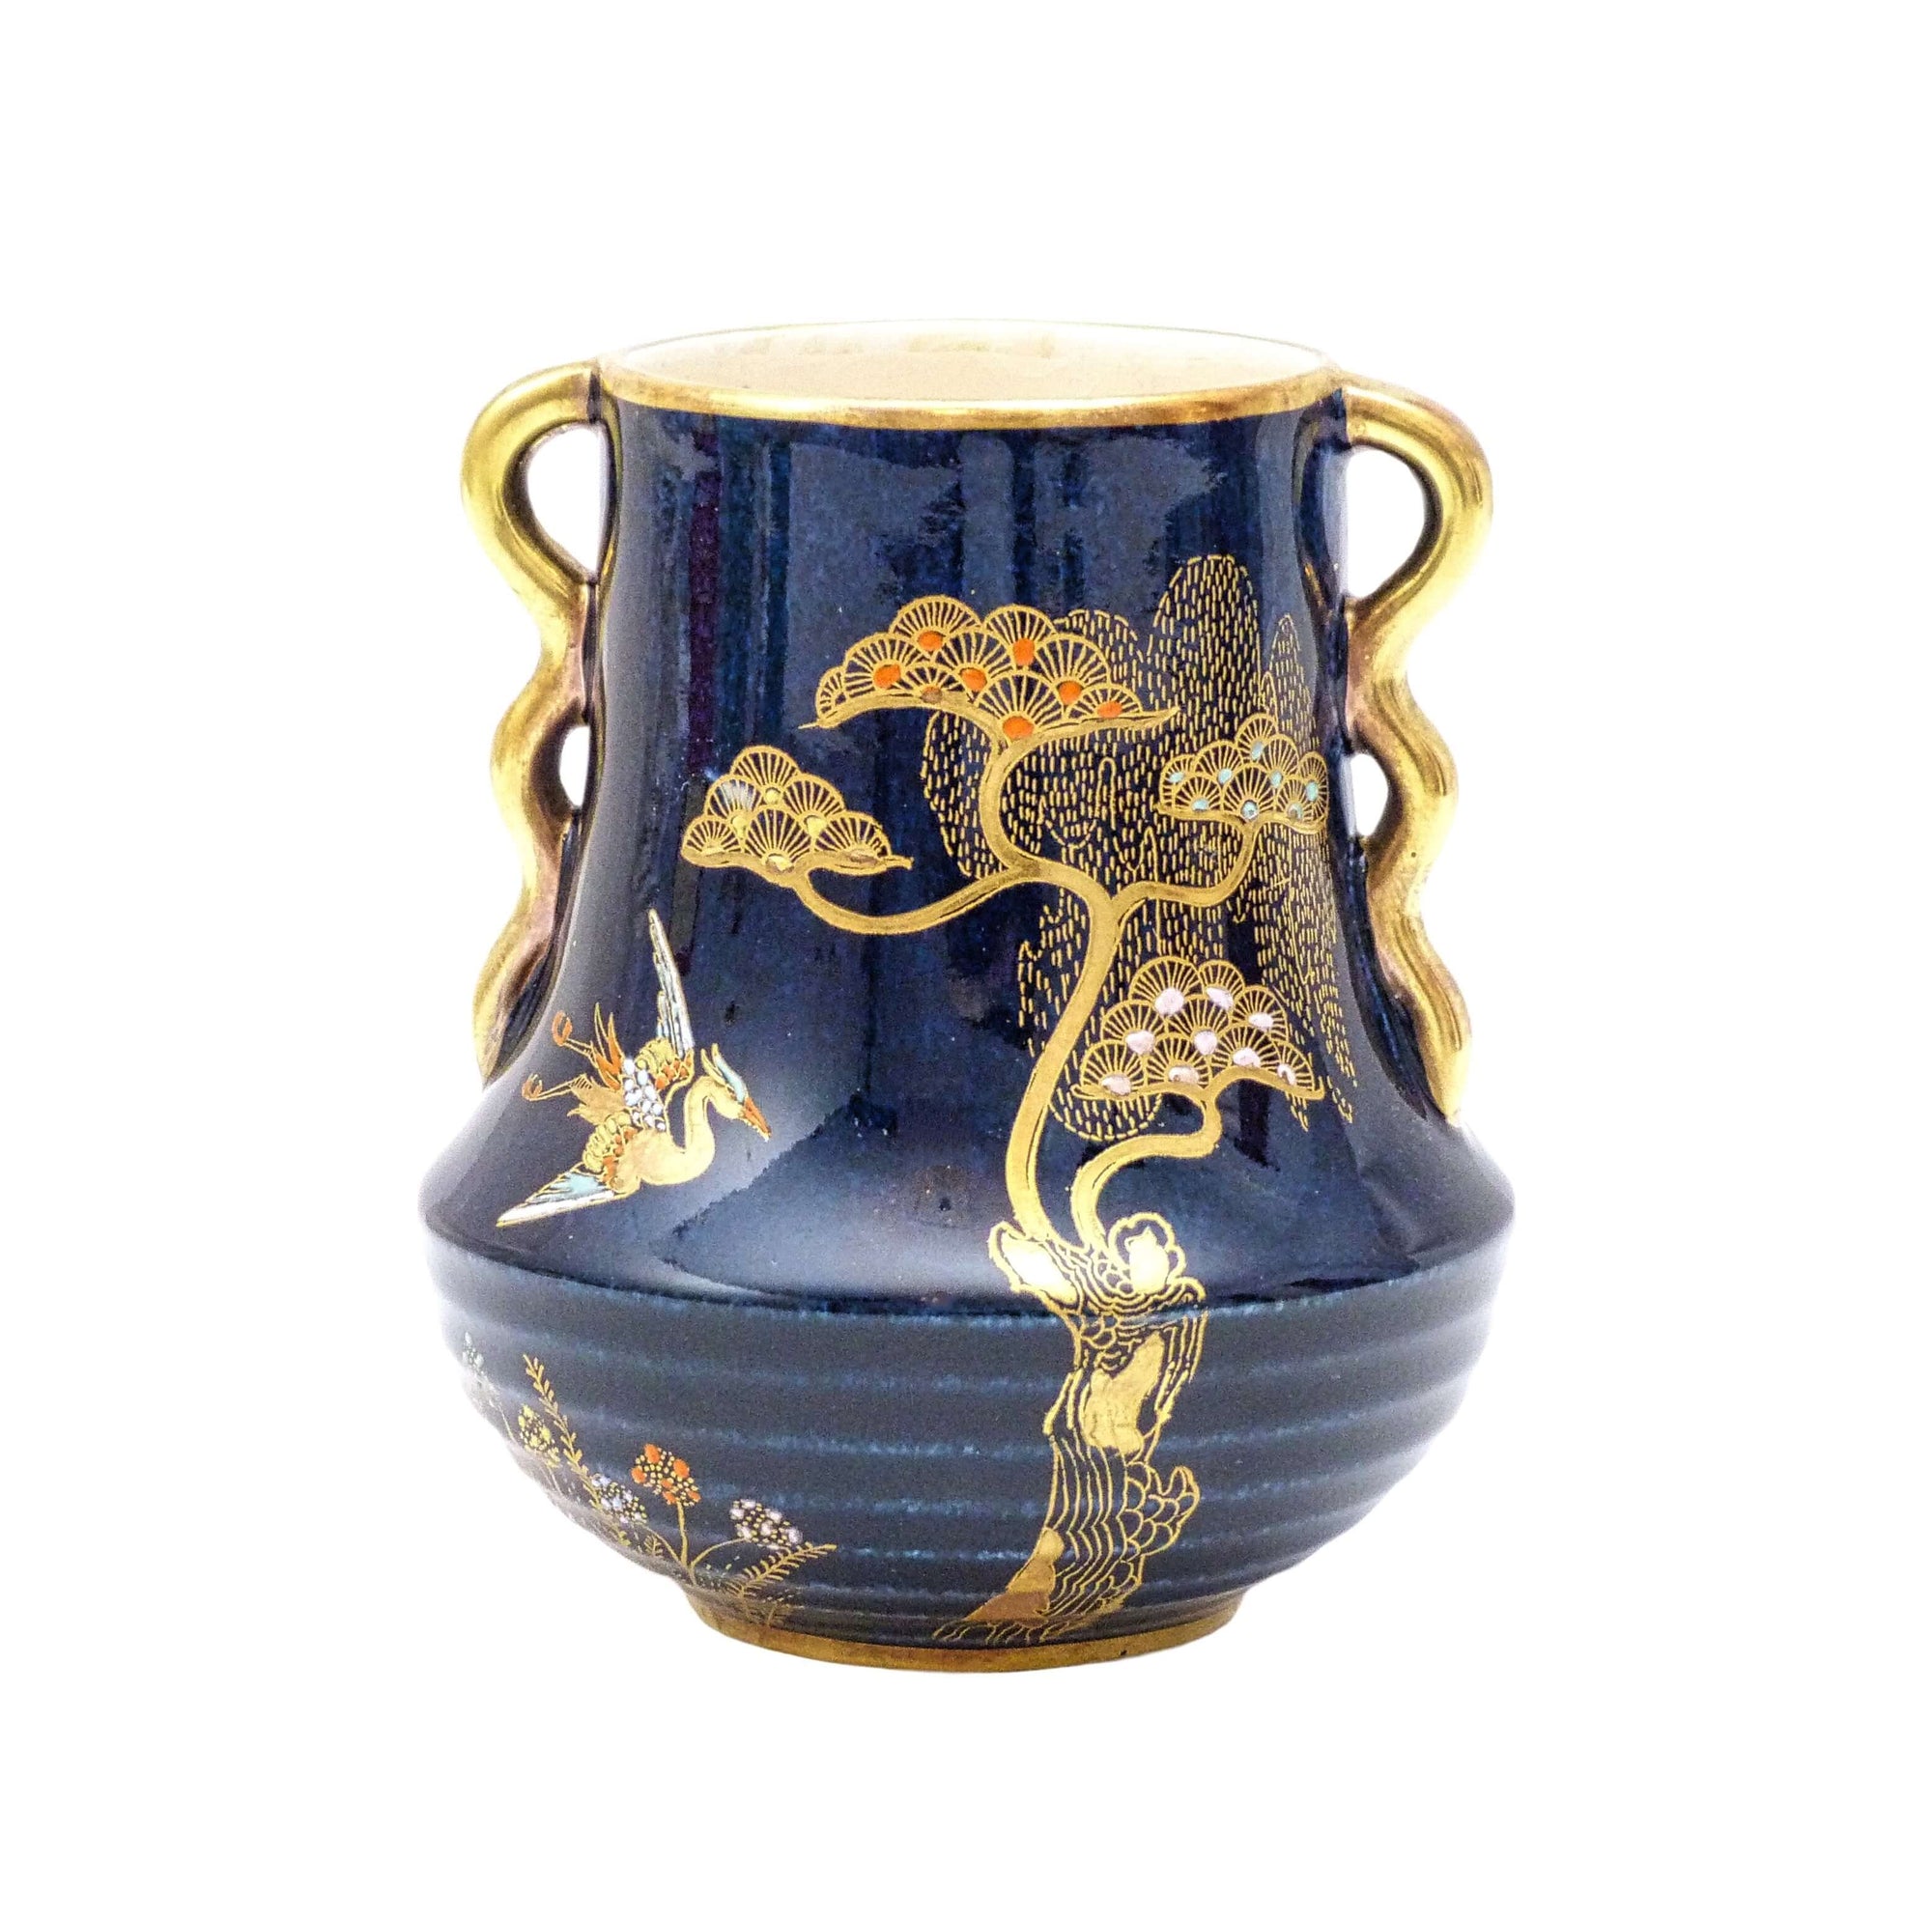 Shiny dark blue small vase with gold handles and rim. Decorated on the body with  hand painted Asian style tree  and stork pattern.